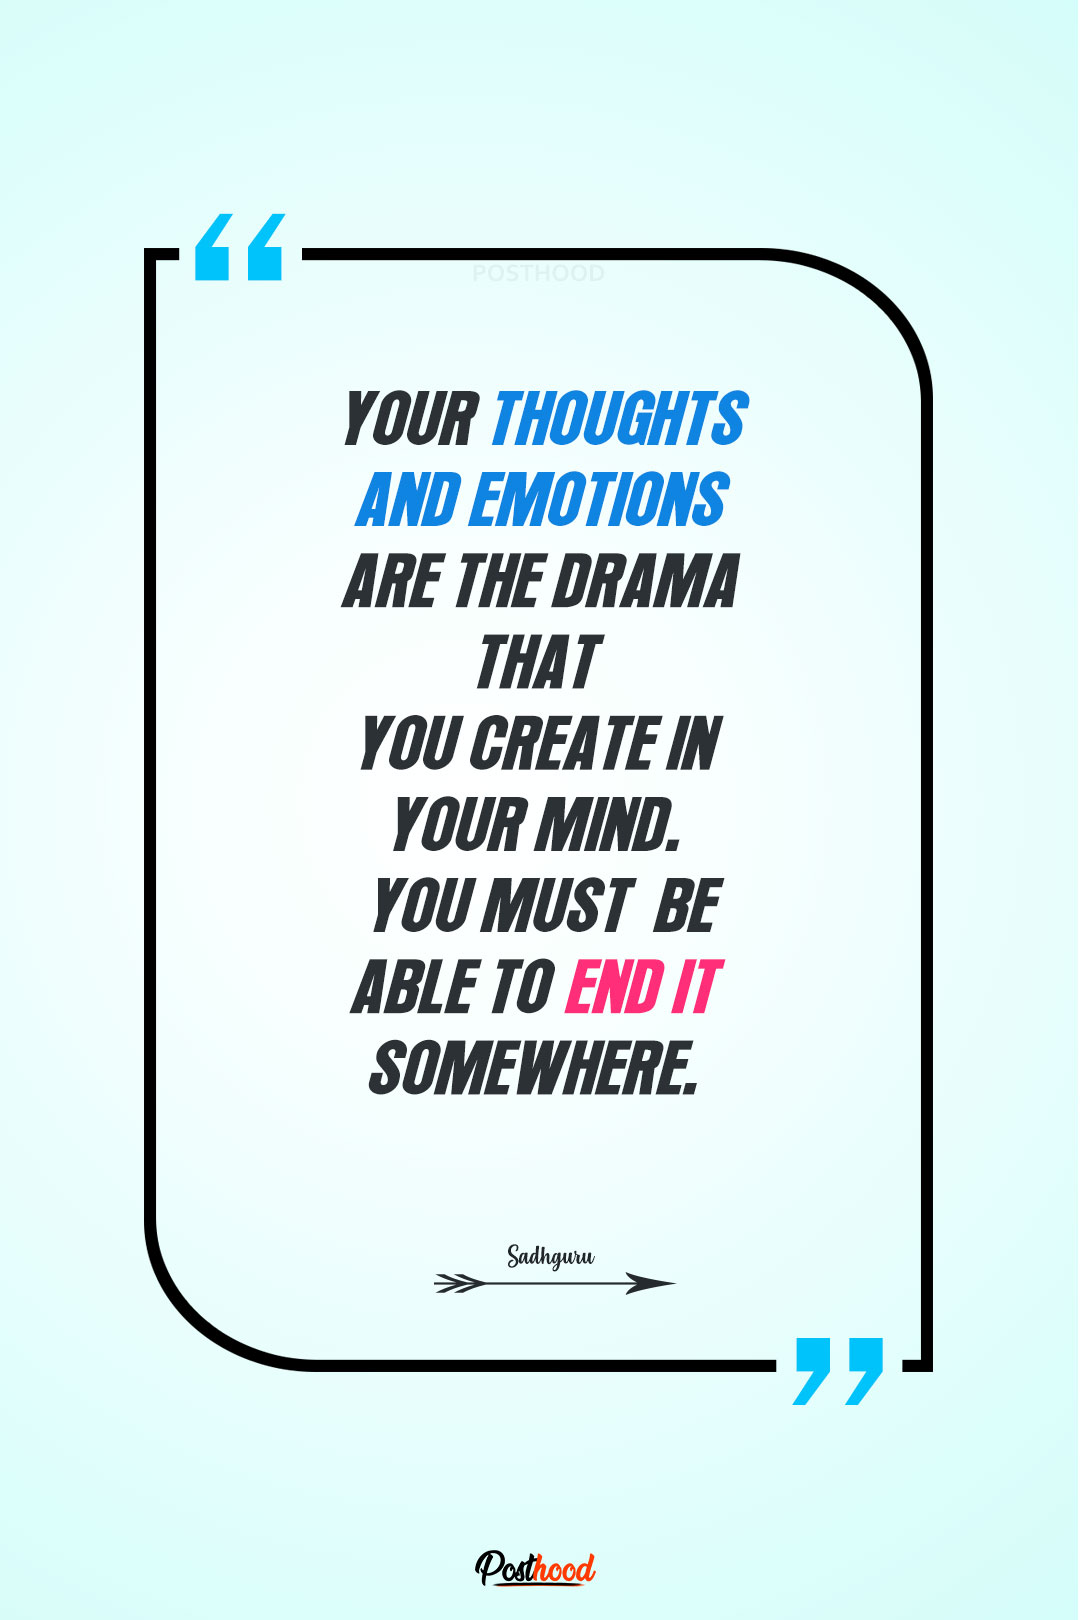 30 quotes to remember when you overthink more. These quotes will train your mind to calm down immediately.